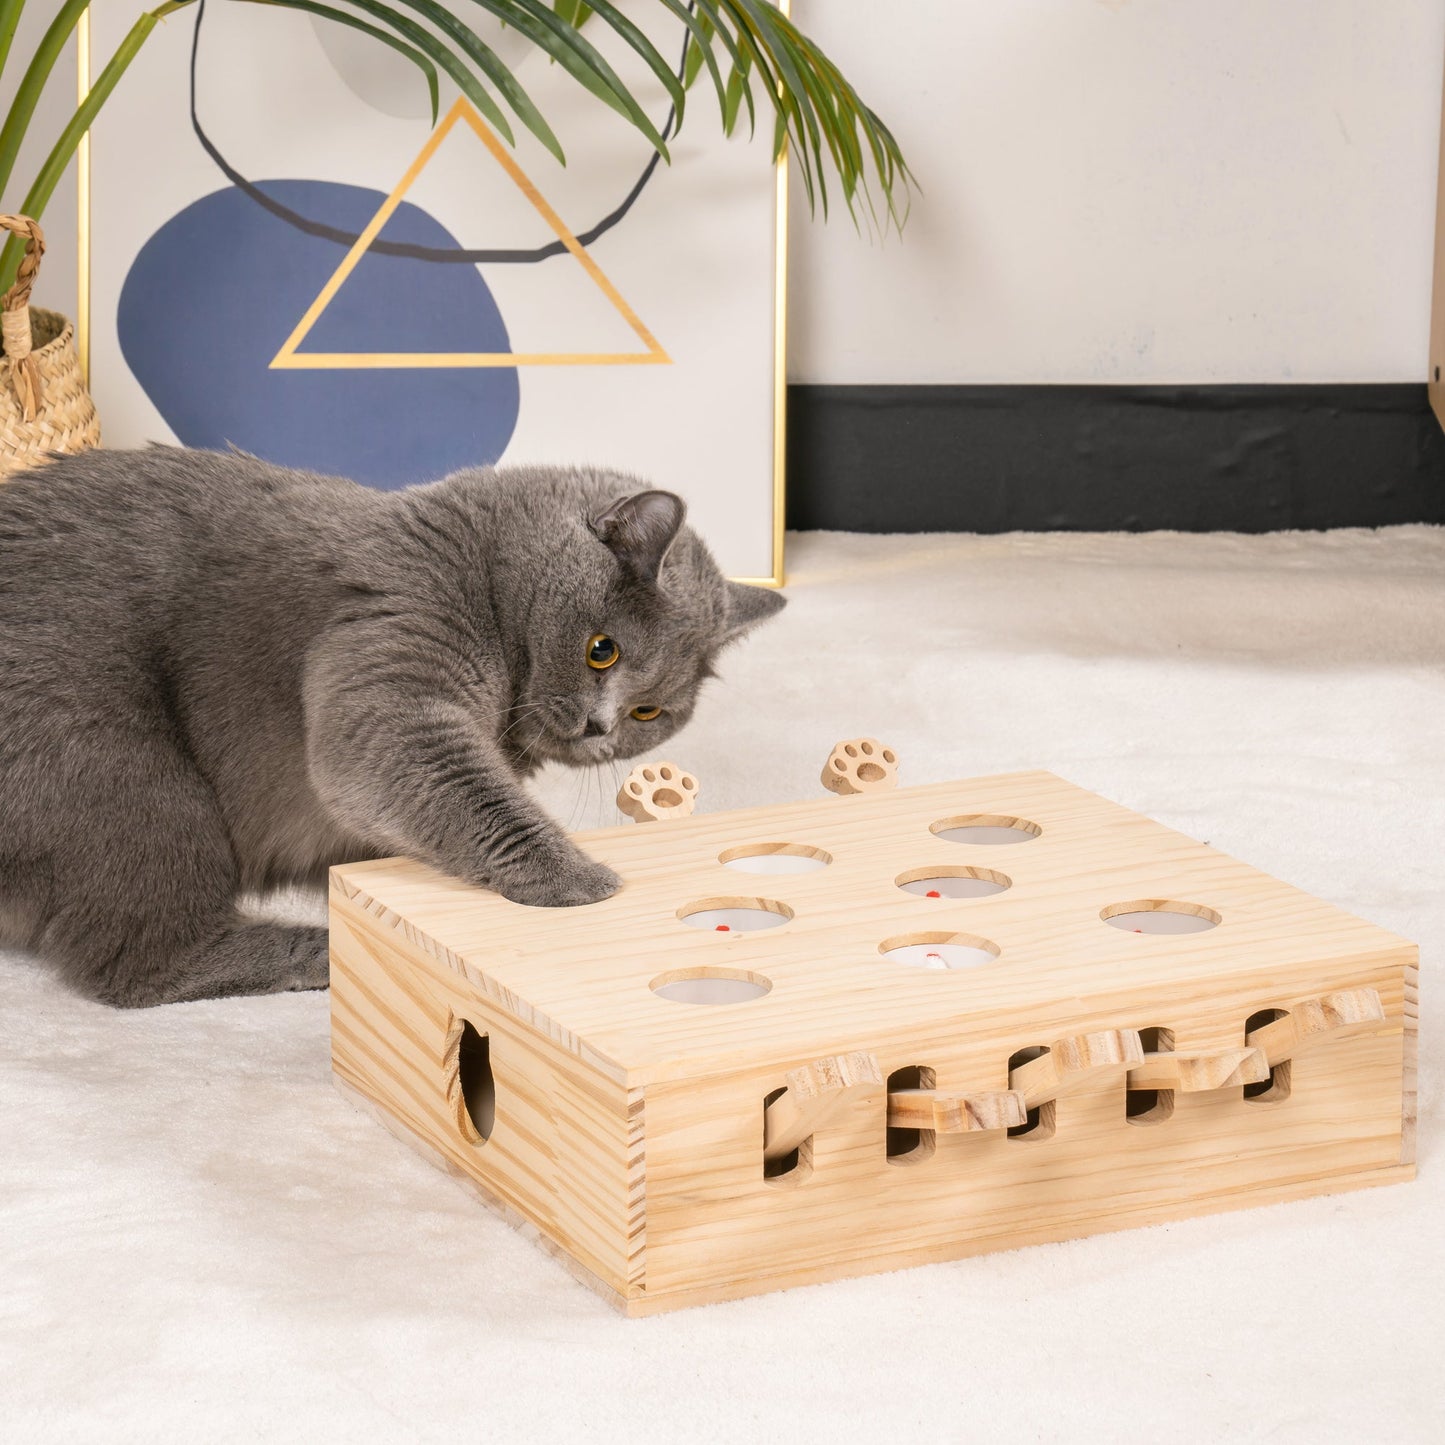 Mewoofun 8 Holes Cat Toys Interactive Whack-a-mole Solid Wood Toys for